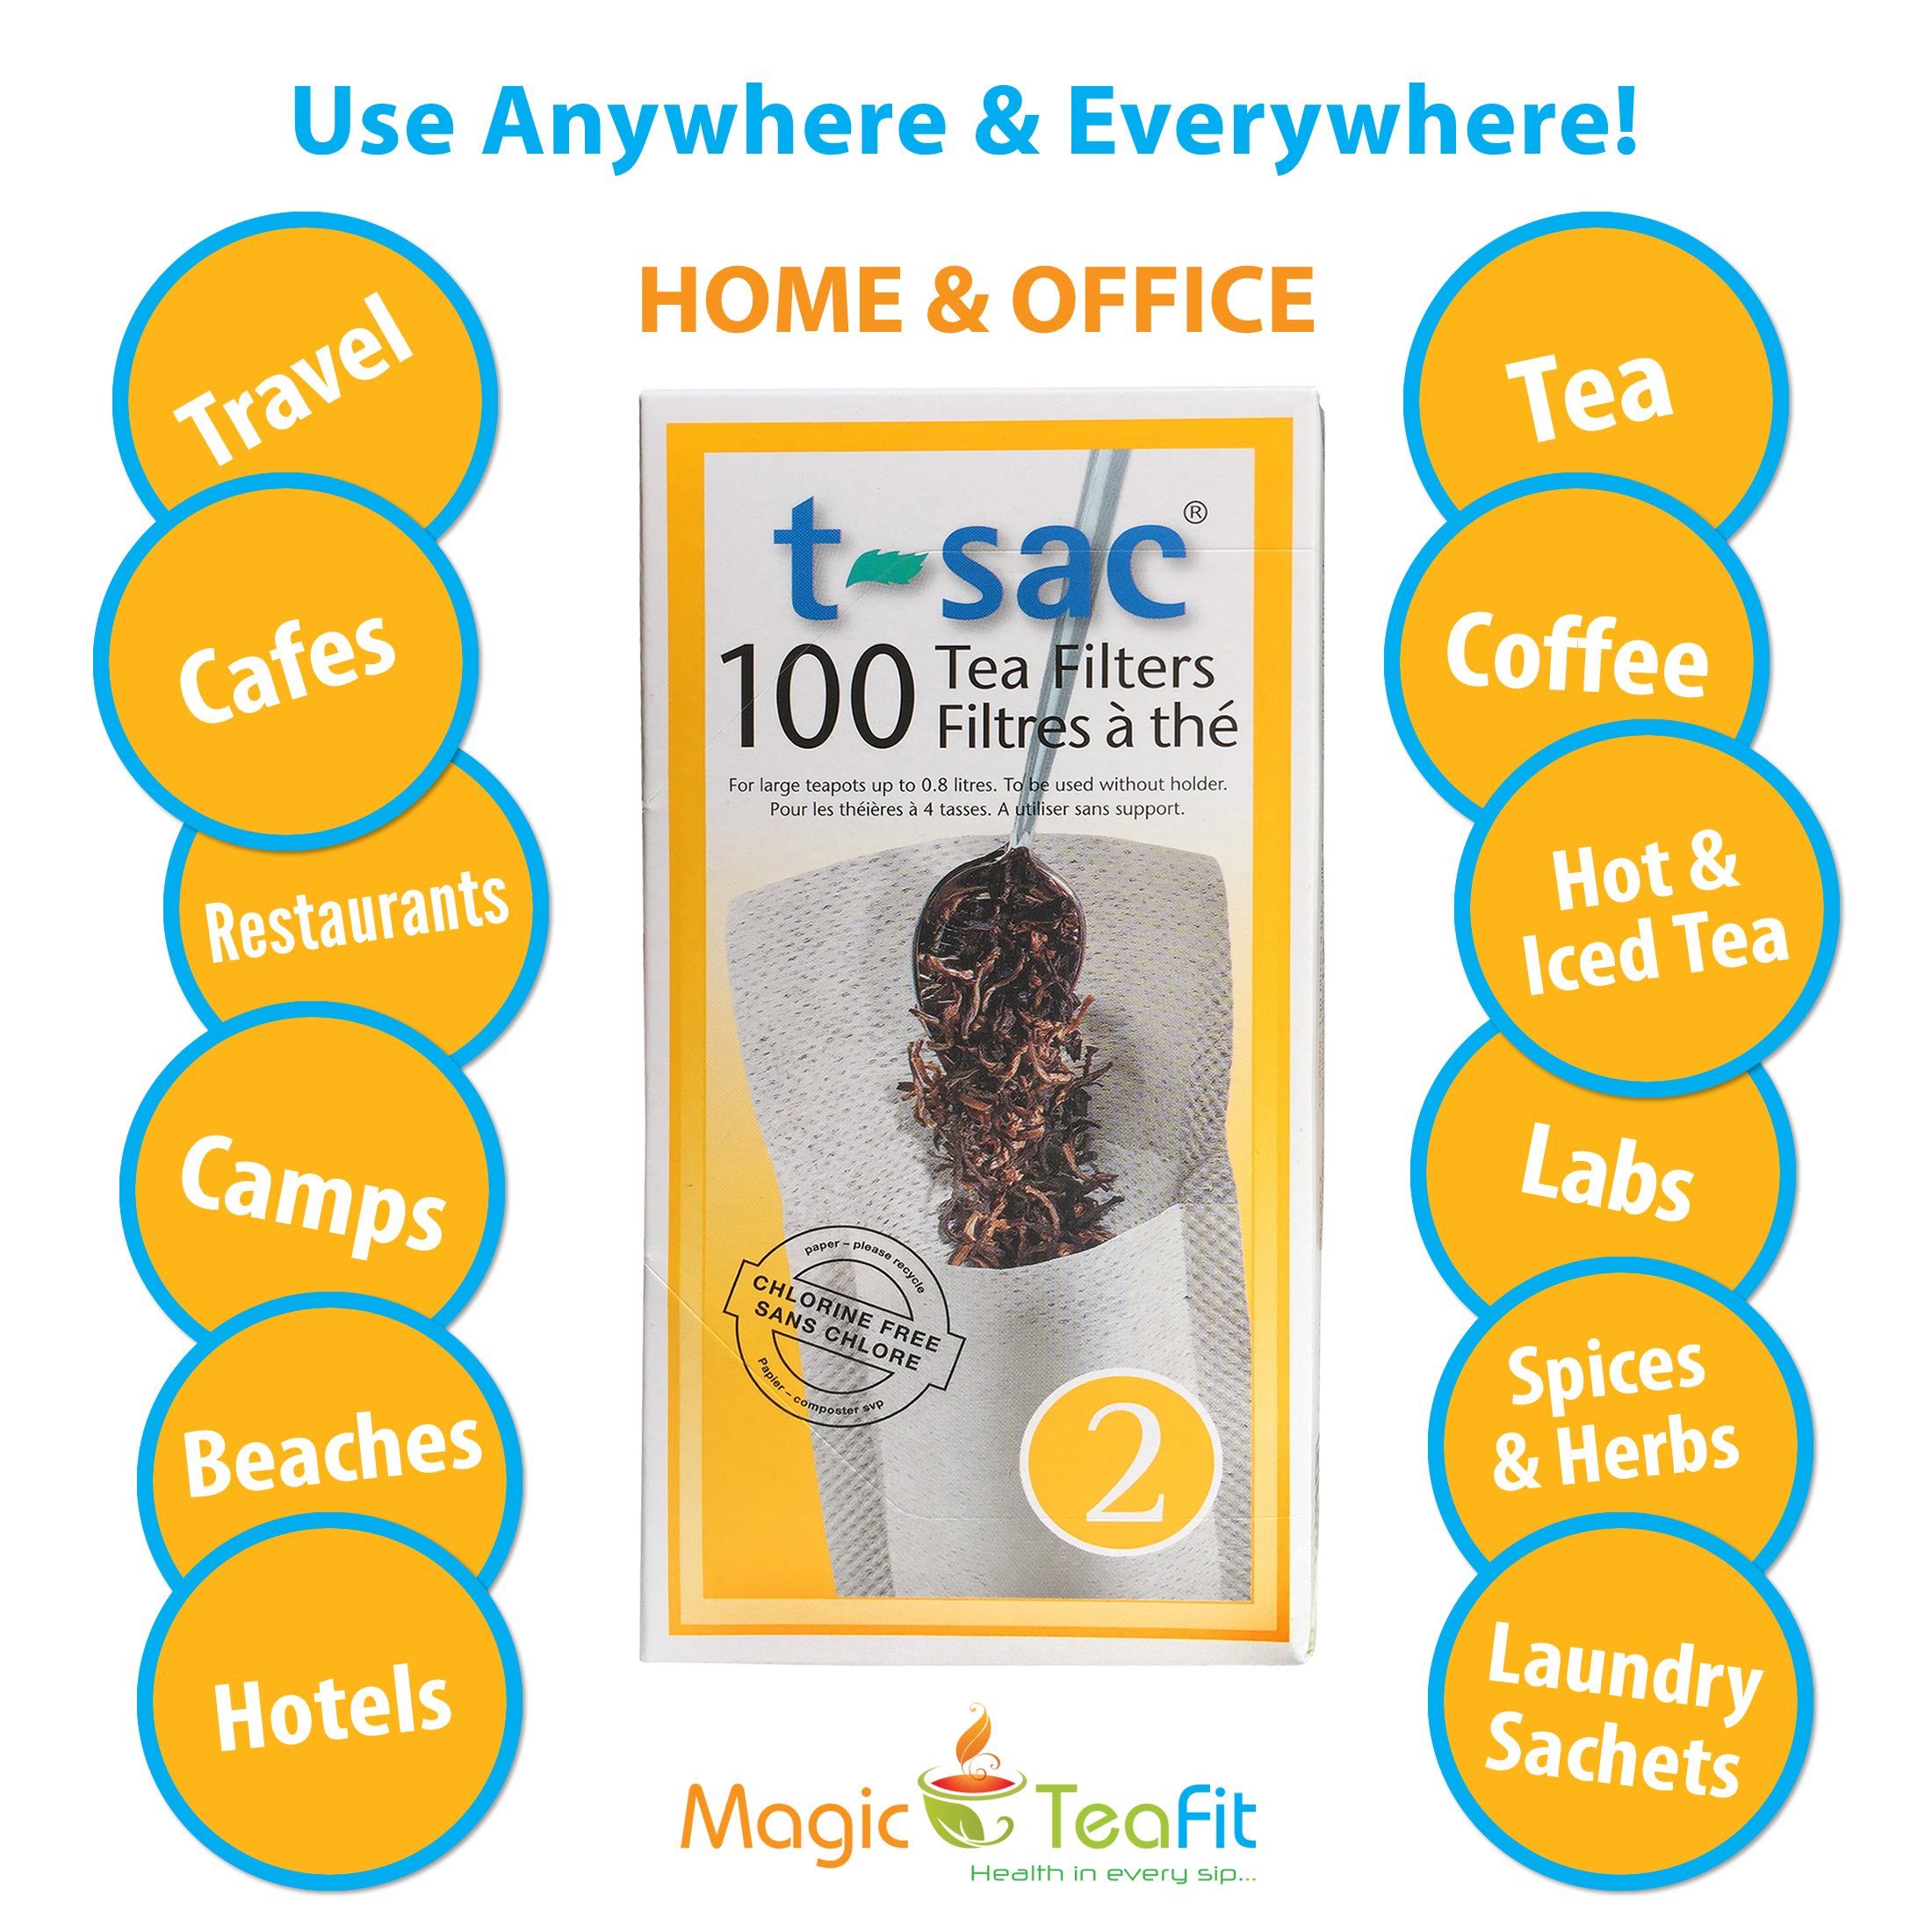 Modern Tea Filter Bags, Disposable Tea Infuser, Size 2, Set of 200 Filters - 2 Boxes - Heat Sealable, Natural, Easy to Use Anywhere, No Cleanup – Perfect for Teas, Coffee & Herbs - from Magic Teafit